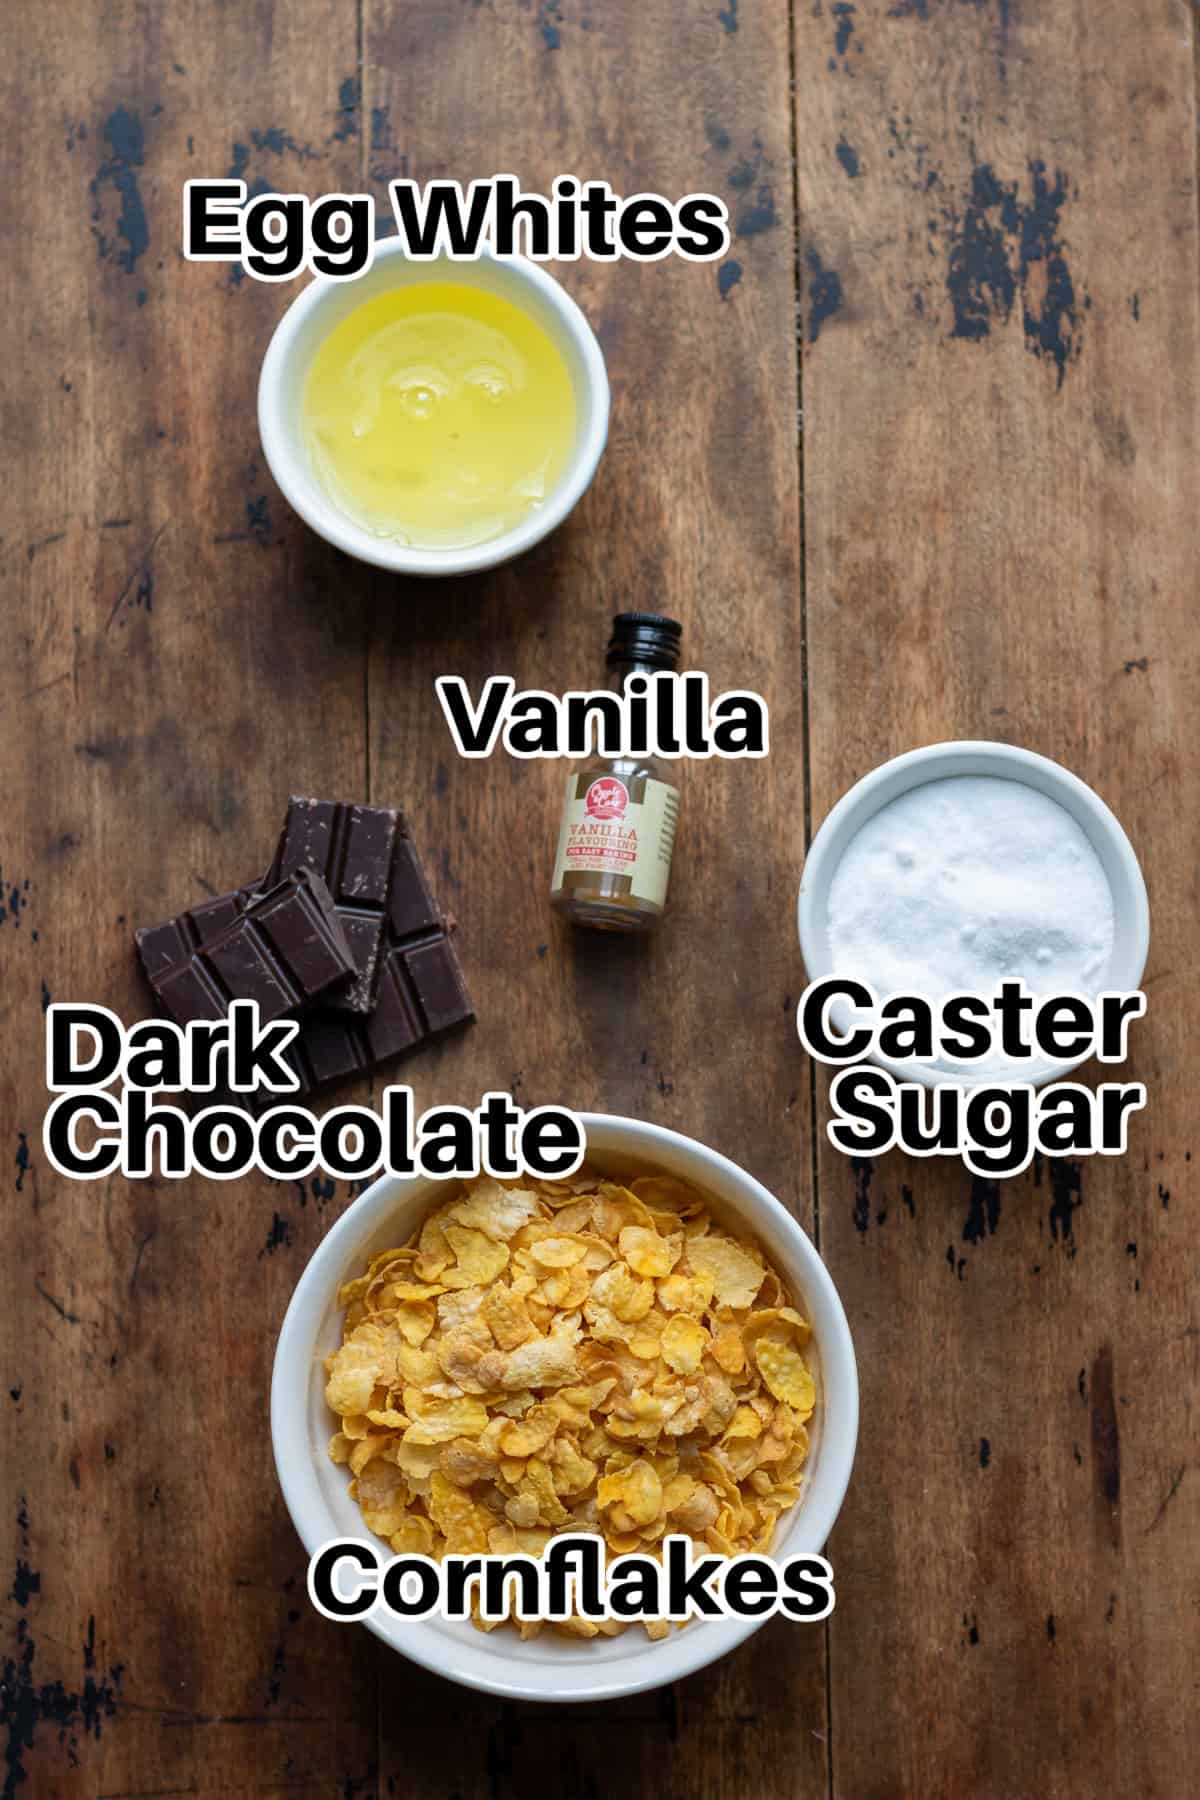 Egg whites, sugar, vanilla, chocolate and cornflakes on a table.